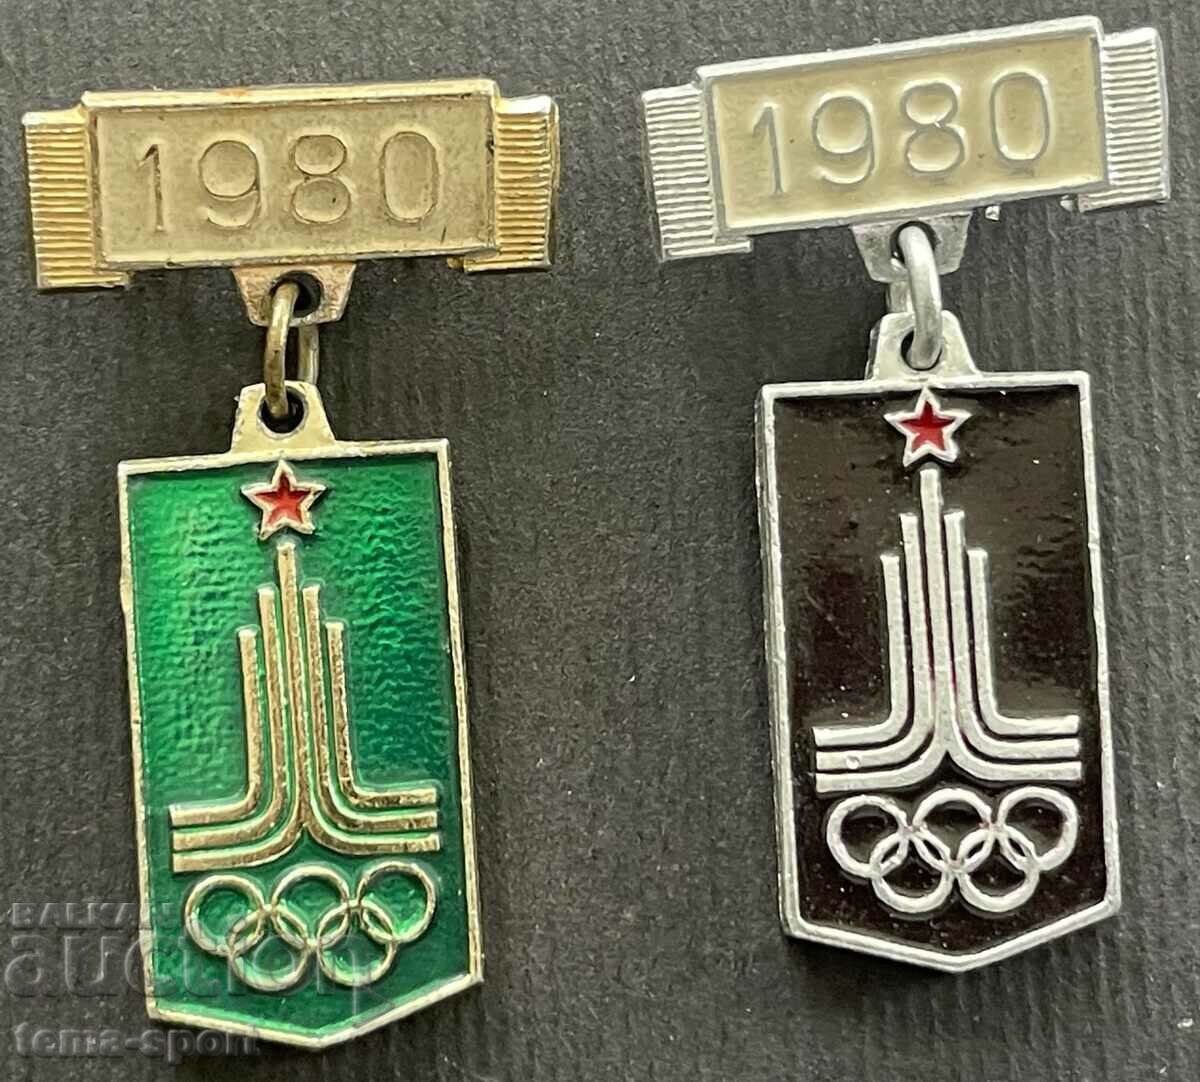 489 USSR lot of 2 Olympic signs Olympics Moscow 1980.